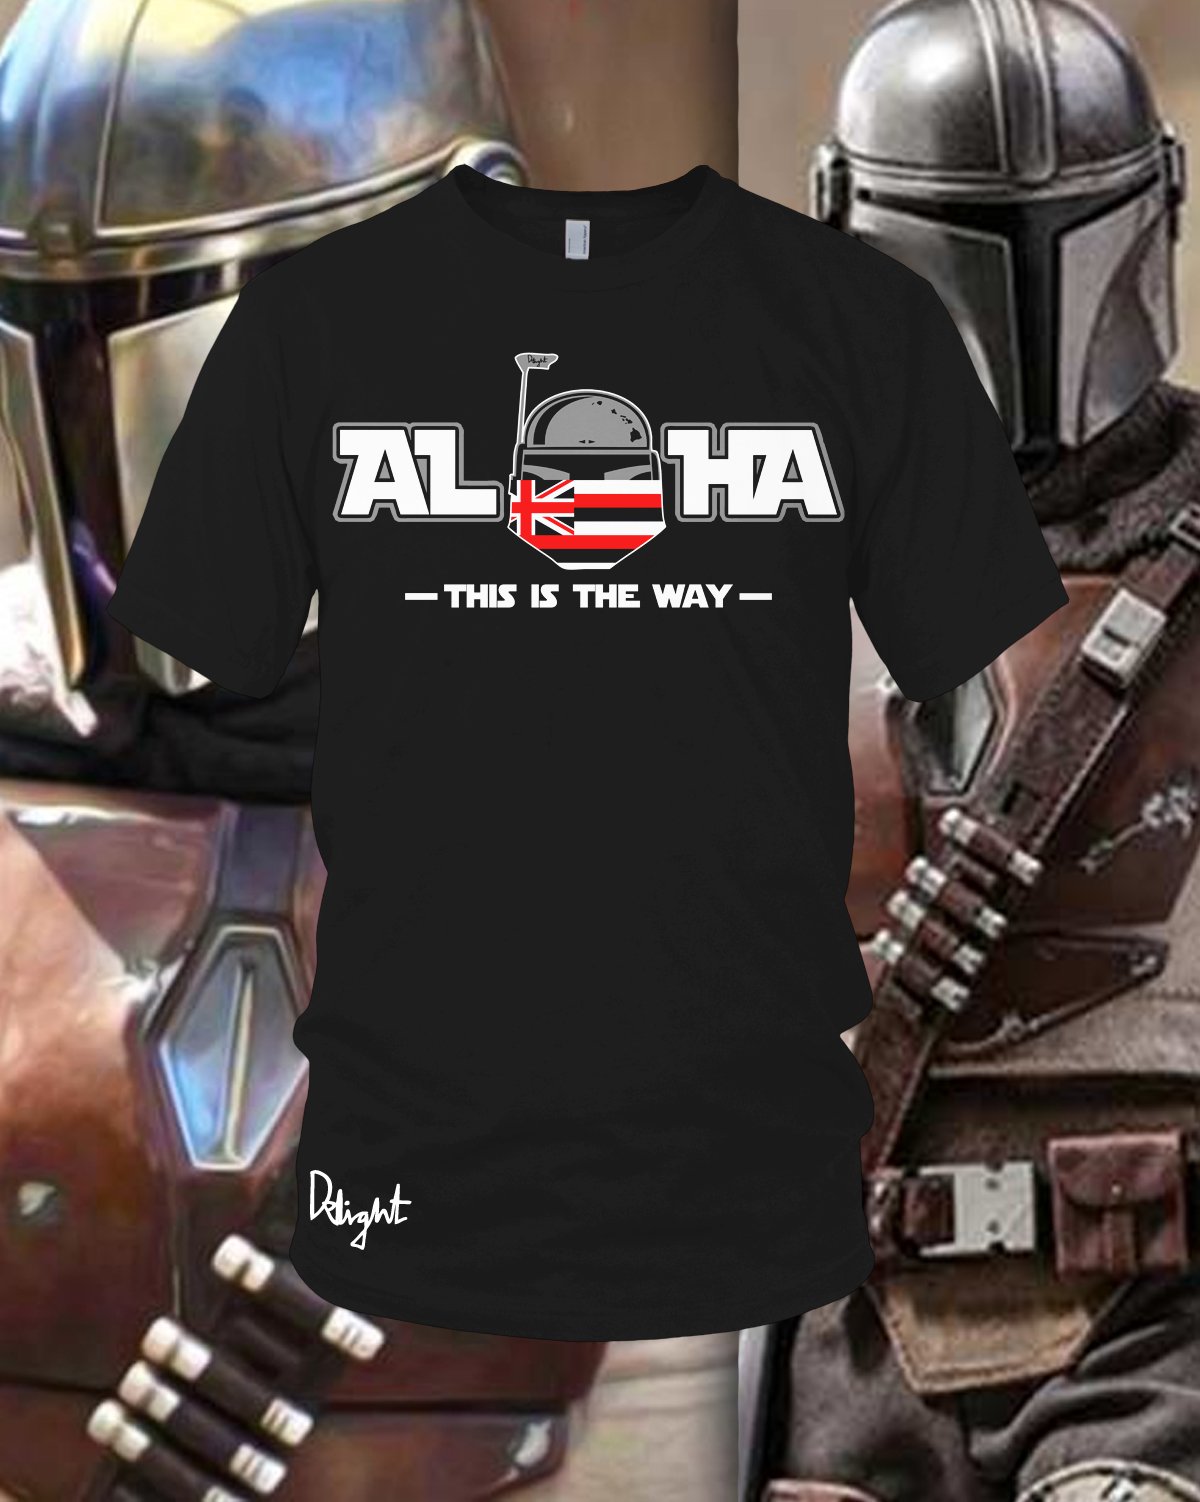 (Adults & Kids Sizes) Aloha - This is the Way Tee (Black)